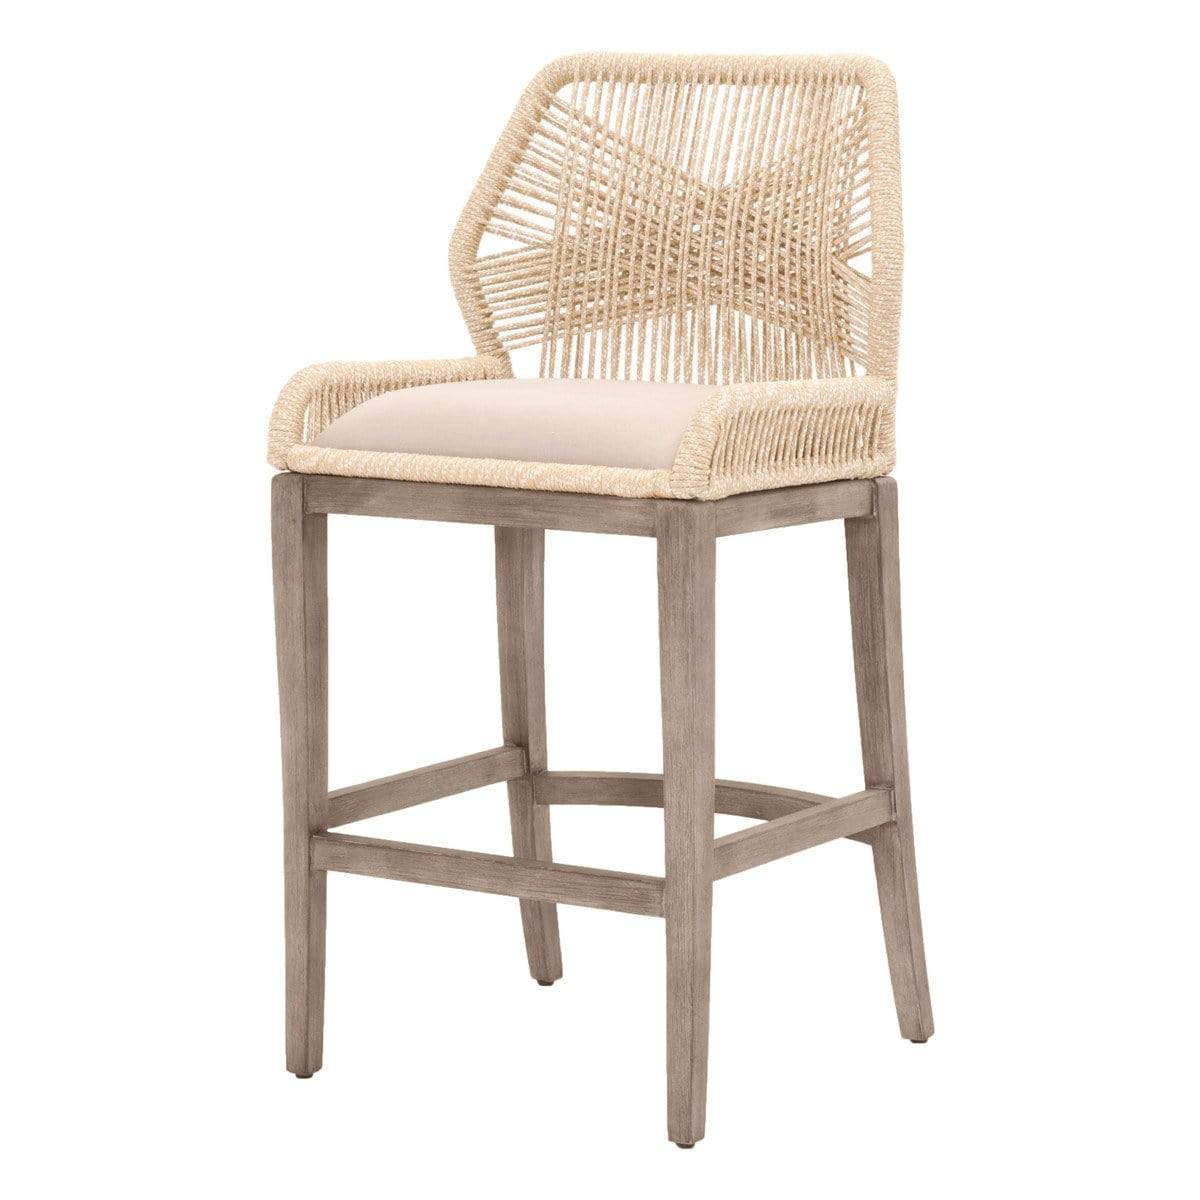 BLU Home Loom Counter Stool - Sand Furniture orient-express-6808CS.SND/LGRY/NG